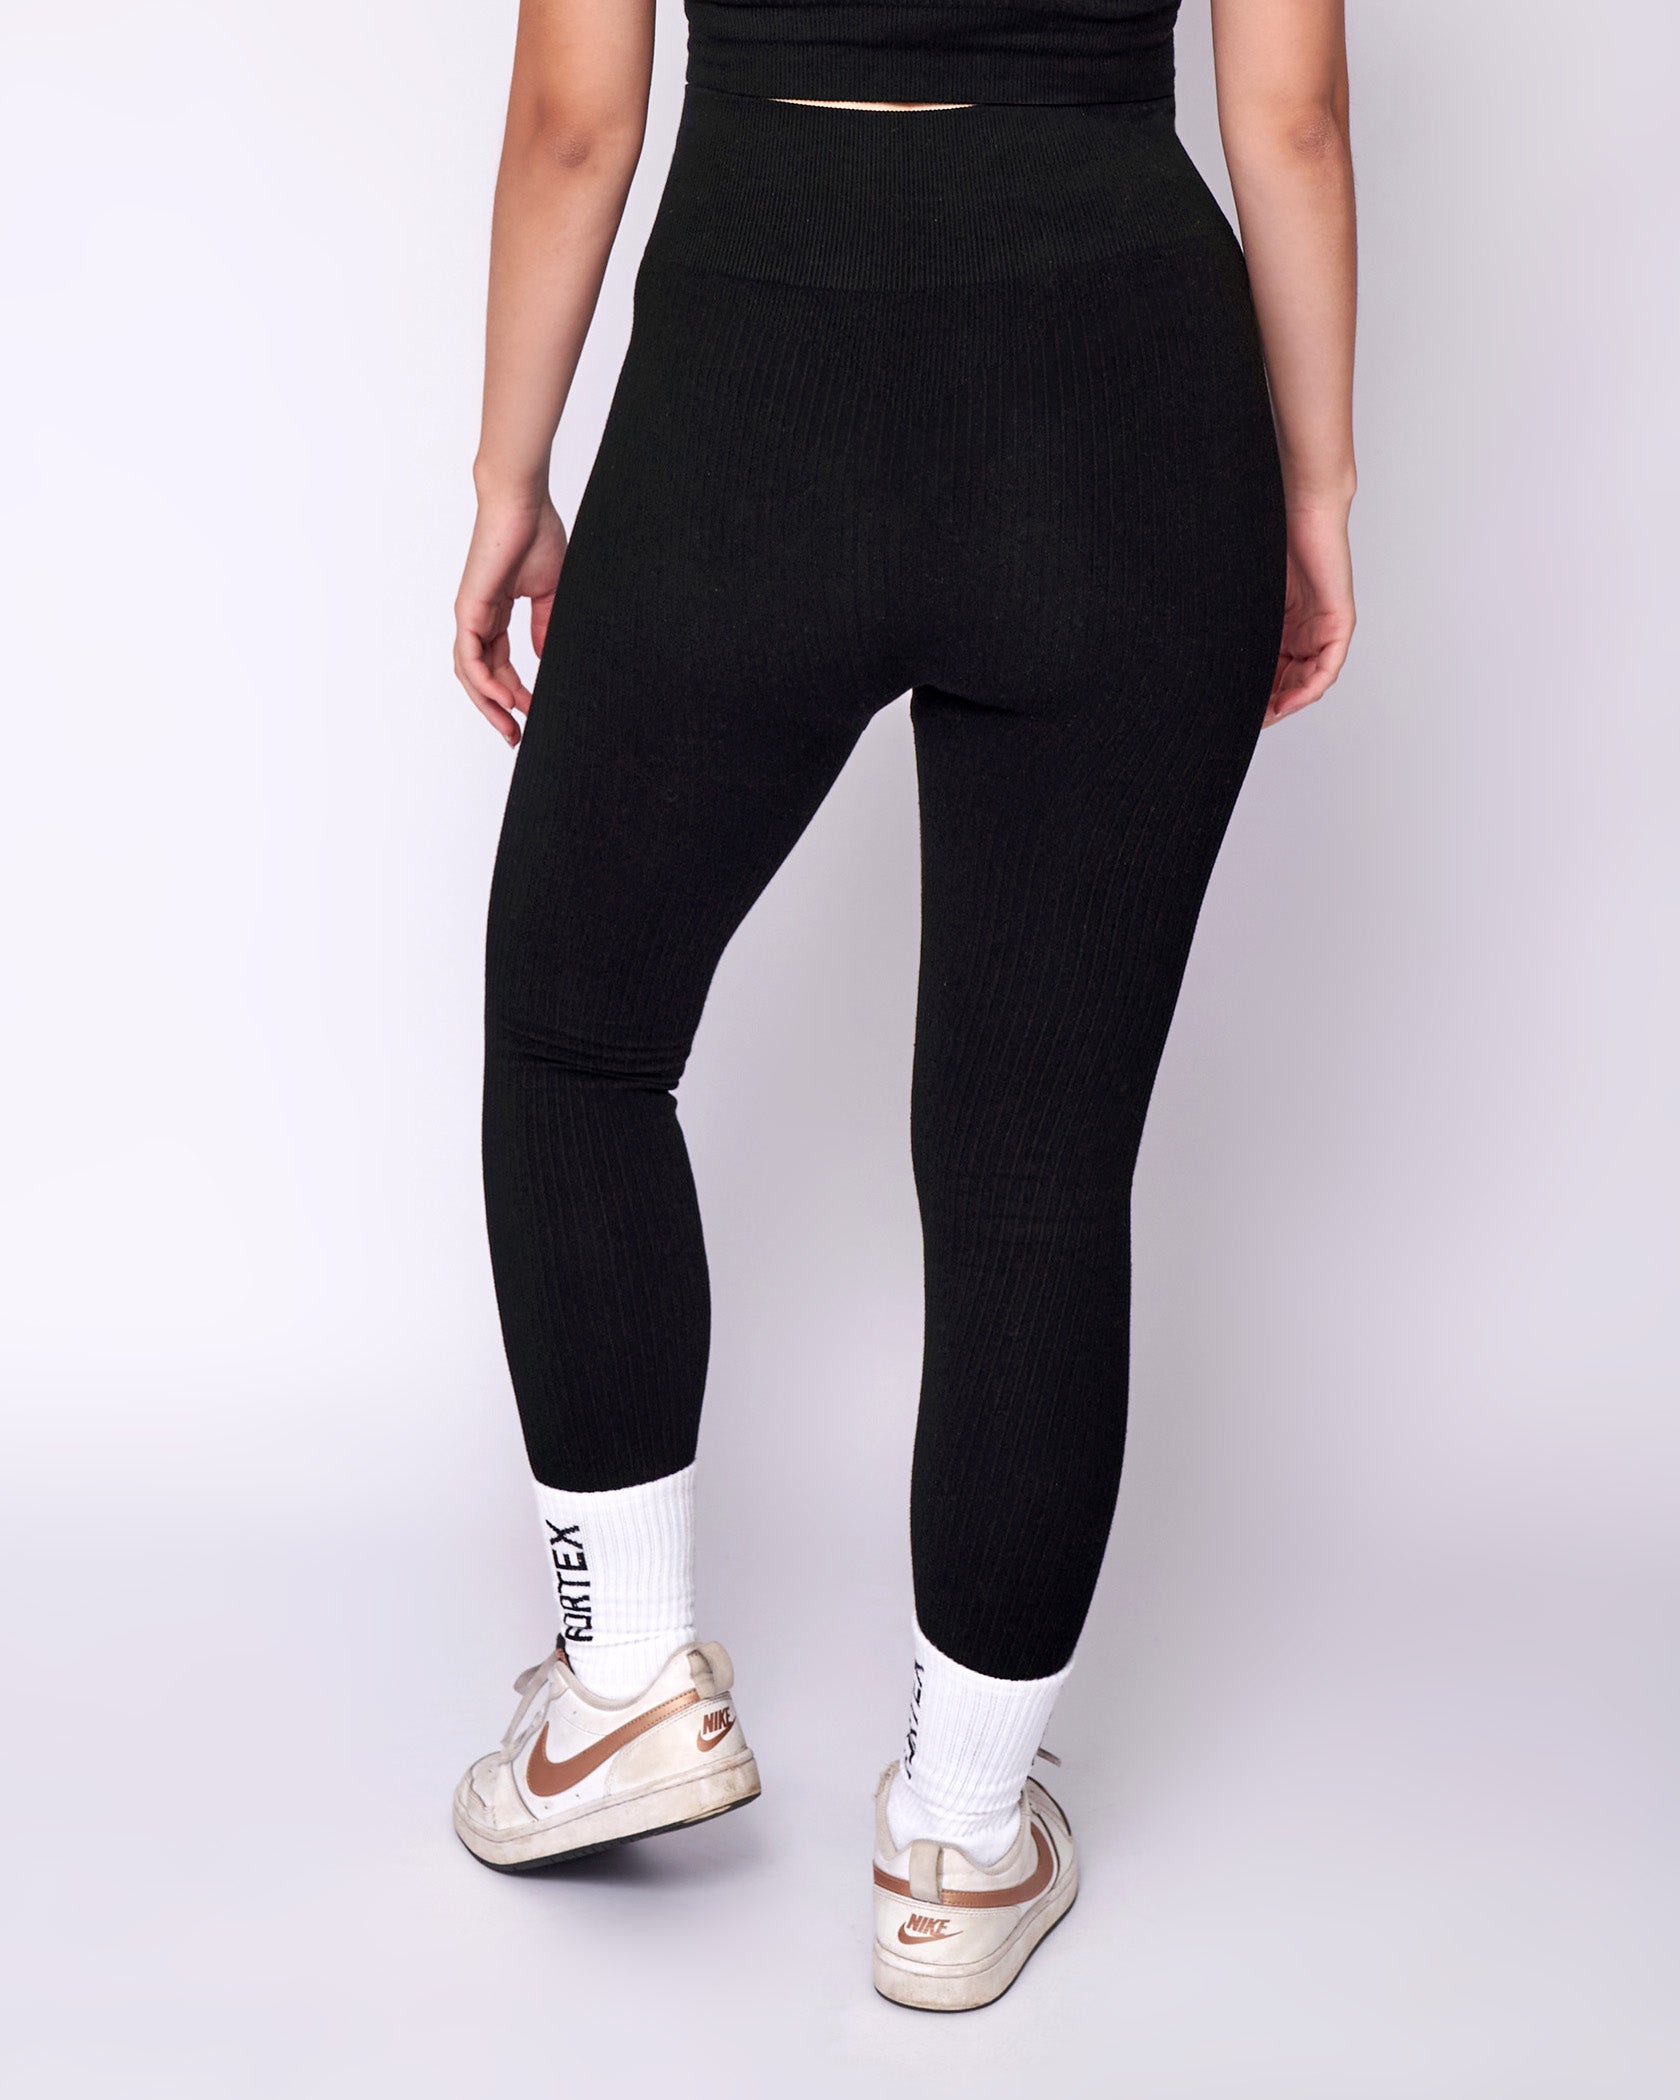 Nike Women's Leggings High-Rise Tight Fit Essential fitness Black RRP $45 S  XL